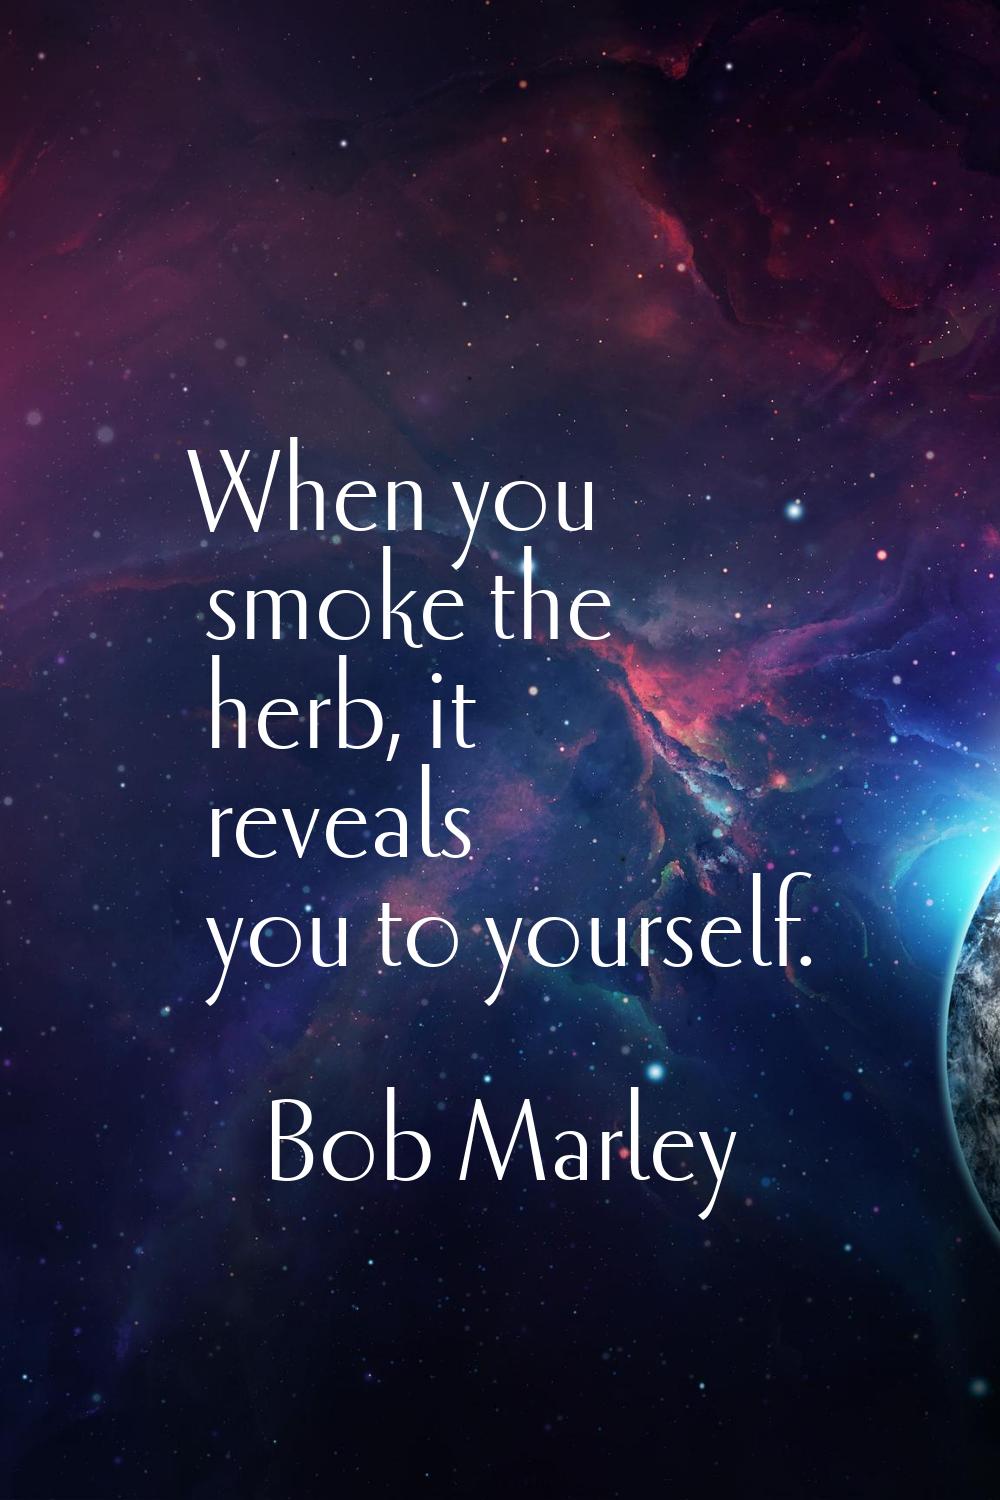 When you smoke the herb, it reveals you to yourself.